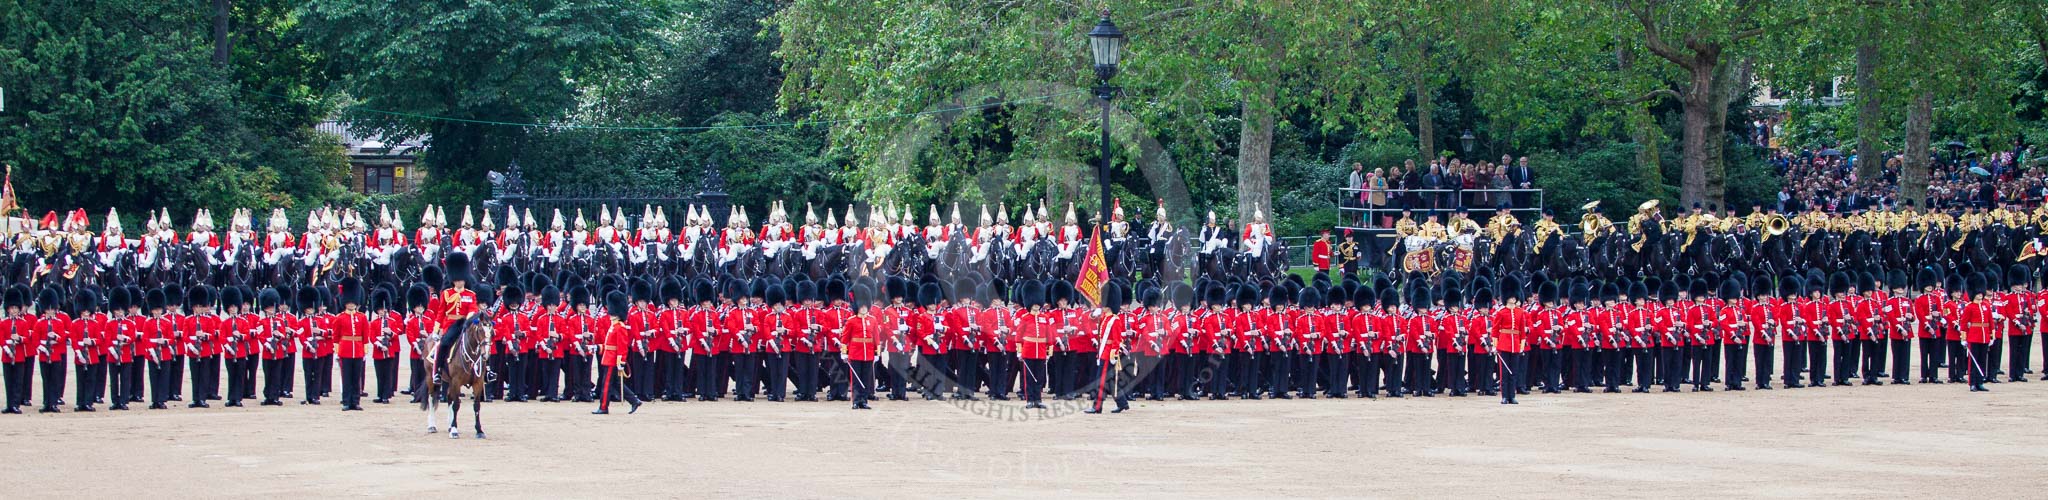 Trooping the Colour 2012: The Colour is trooped along the long lines of guardsmen, with No. 2 Guard at the left to No. 5 Guard on the right. In front, on the left, the Field Officer, and in the centre the Ensign, carrying the Colour..
Horse Guards Parade, Westminster,
London SW1,

United Kingdom,
on 16 June 2012 at 11:27, image #352